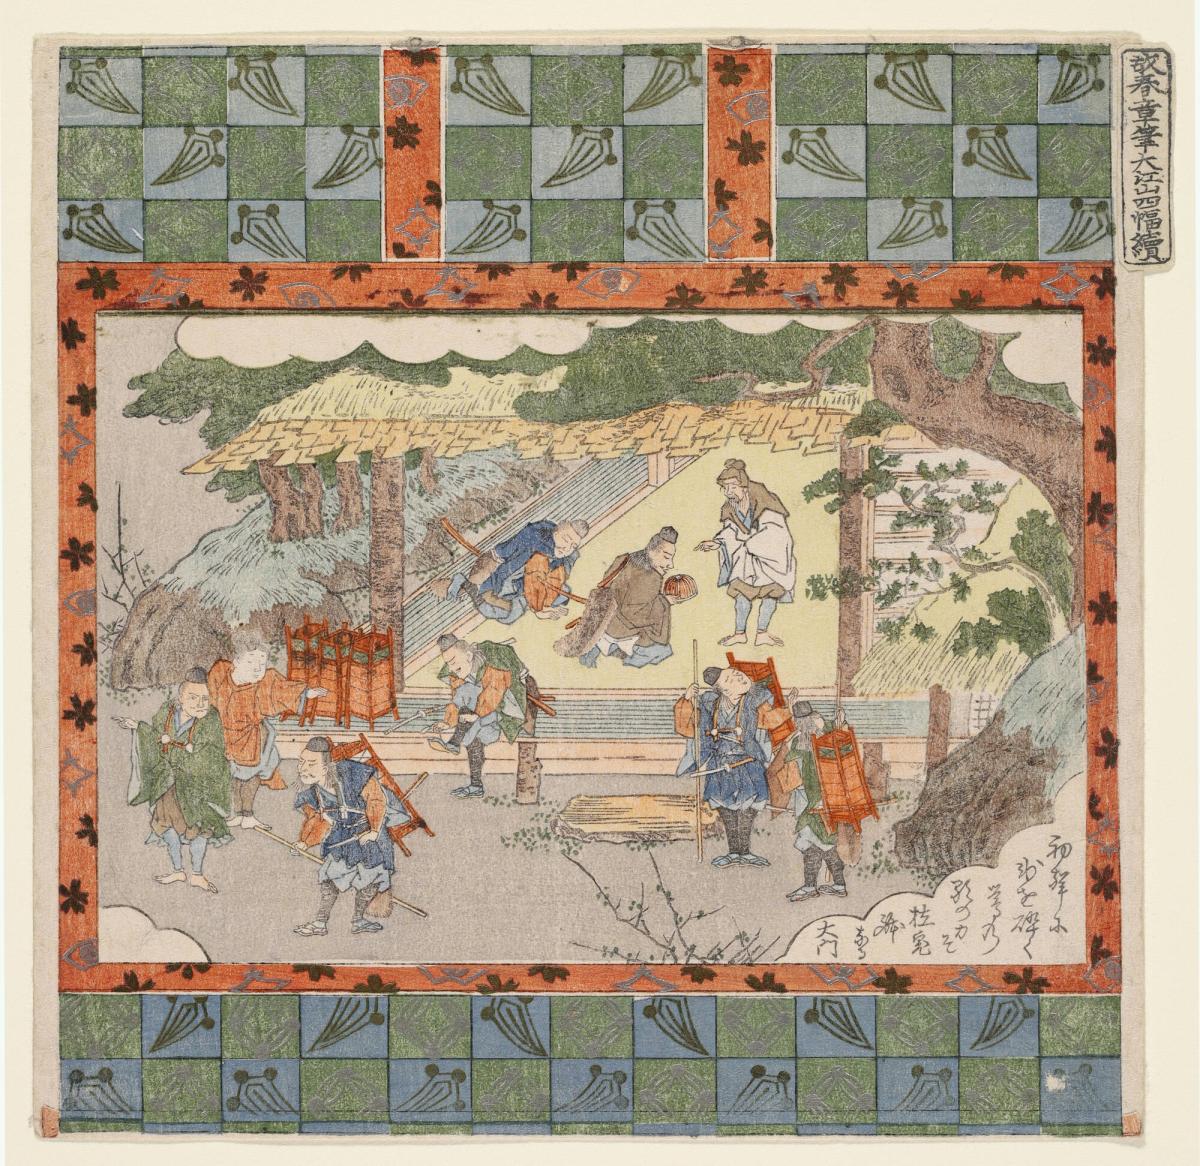 Raiko and His Retainers Disguise Themselves as Priests and Set Off for Oe Mountain, from the series Four Paintings of the Journey to Mt. Oe by the Late Shunsho